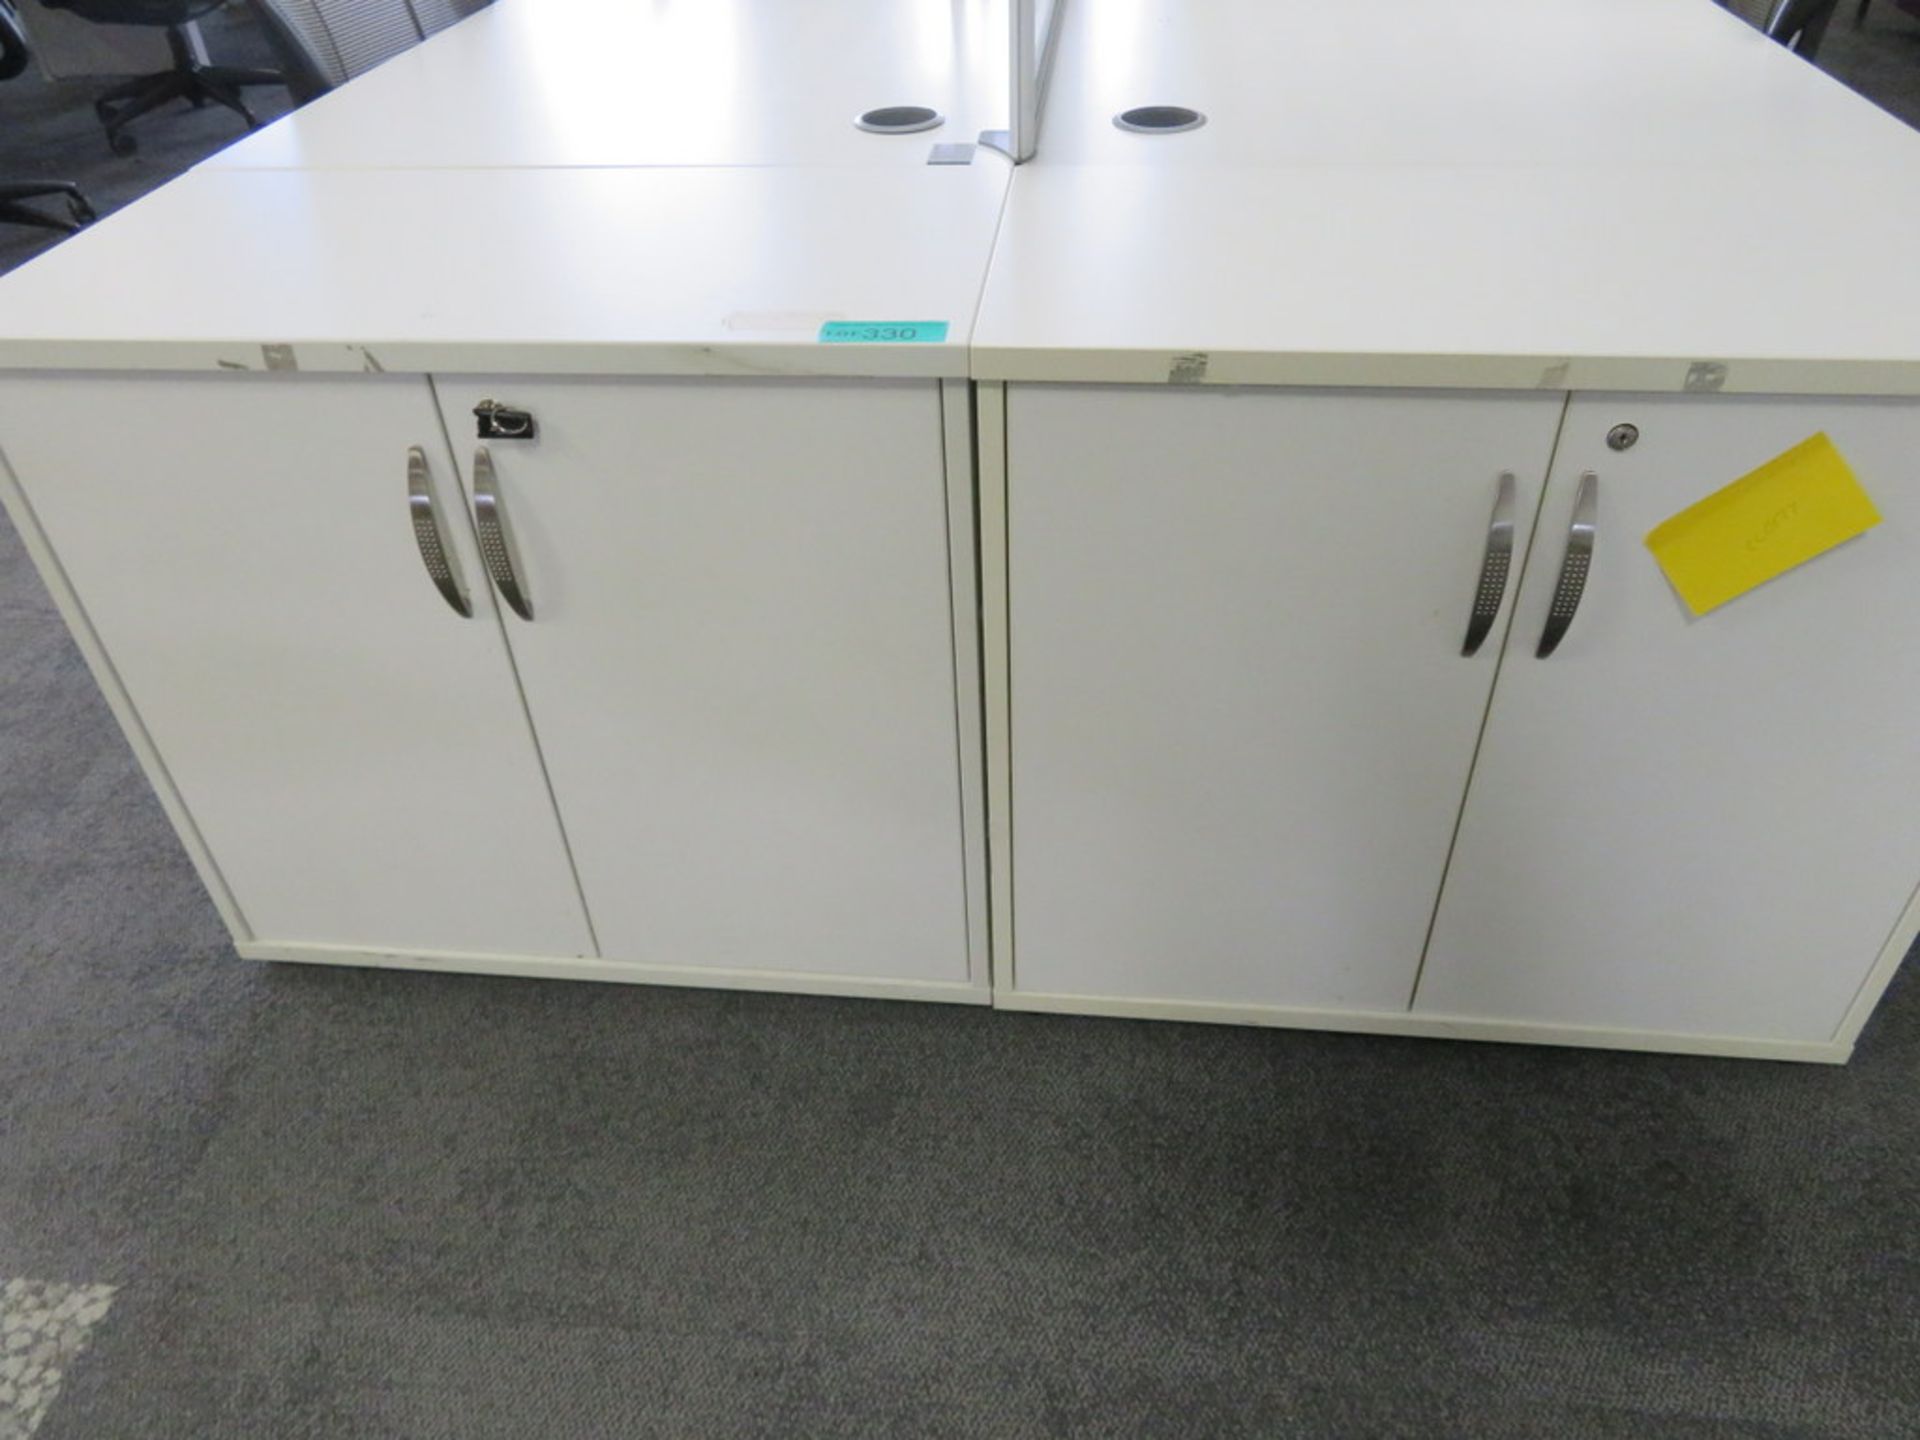 12 Person Desk Arrangement With Dividers, Monitor Arms & Storage Cupboards. Chairs Are Not Included. - Image 3 of 4